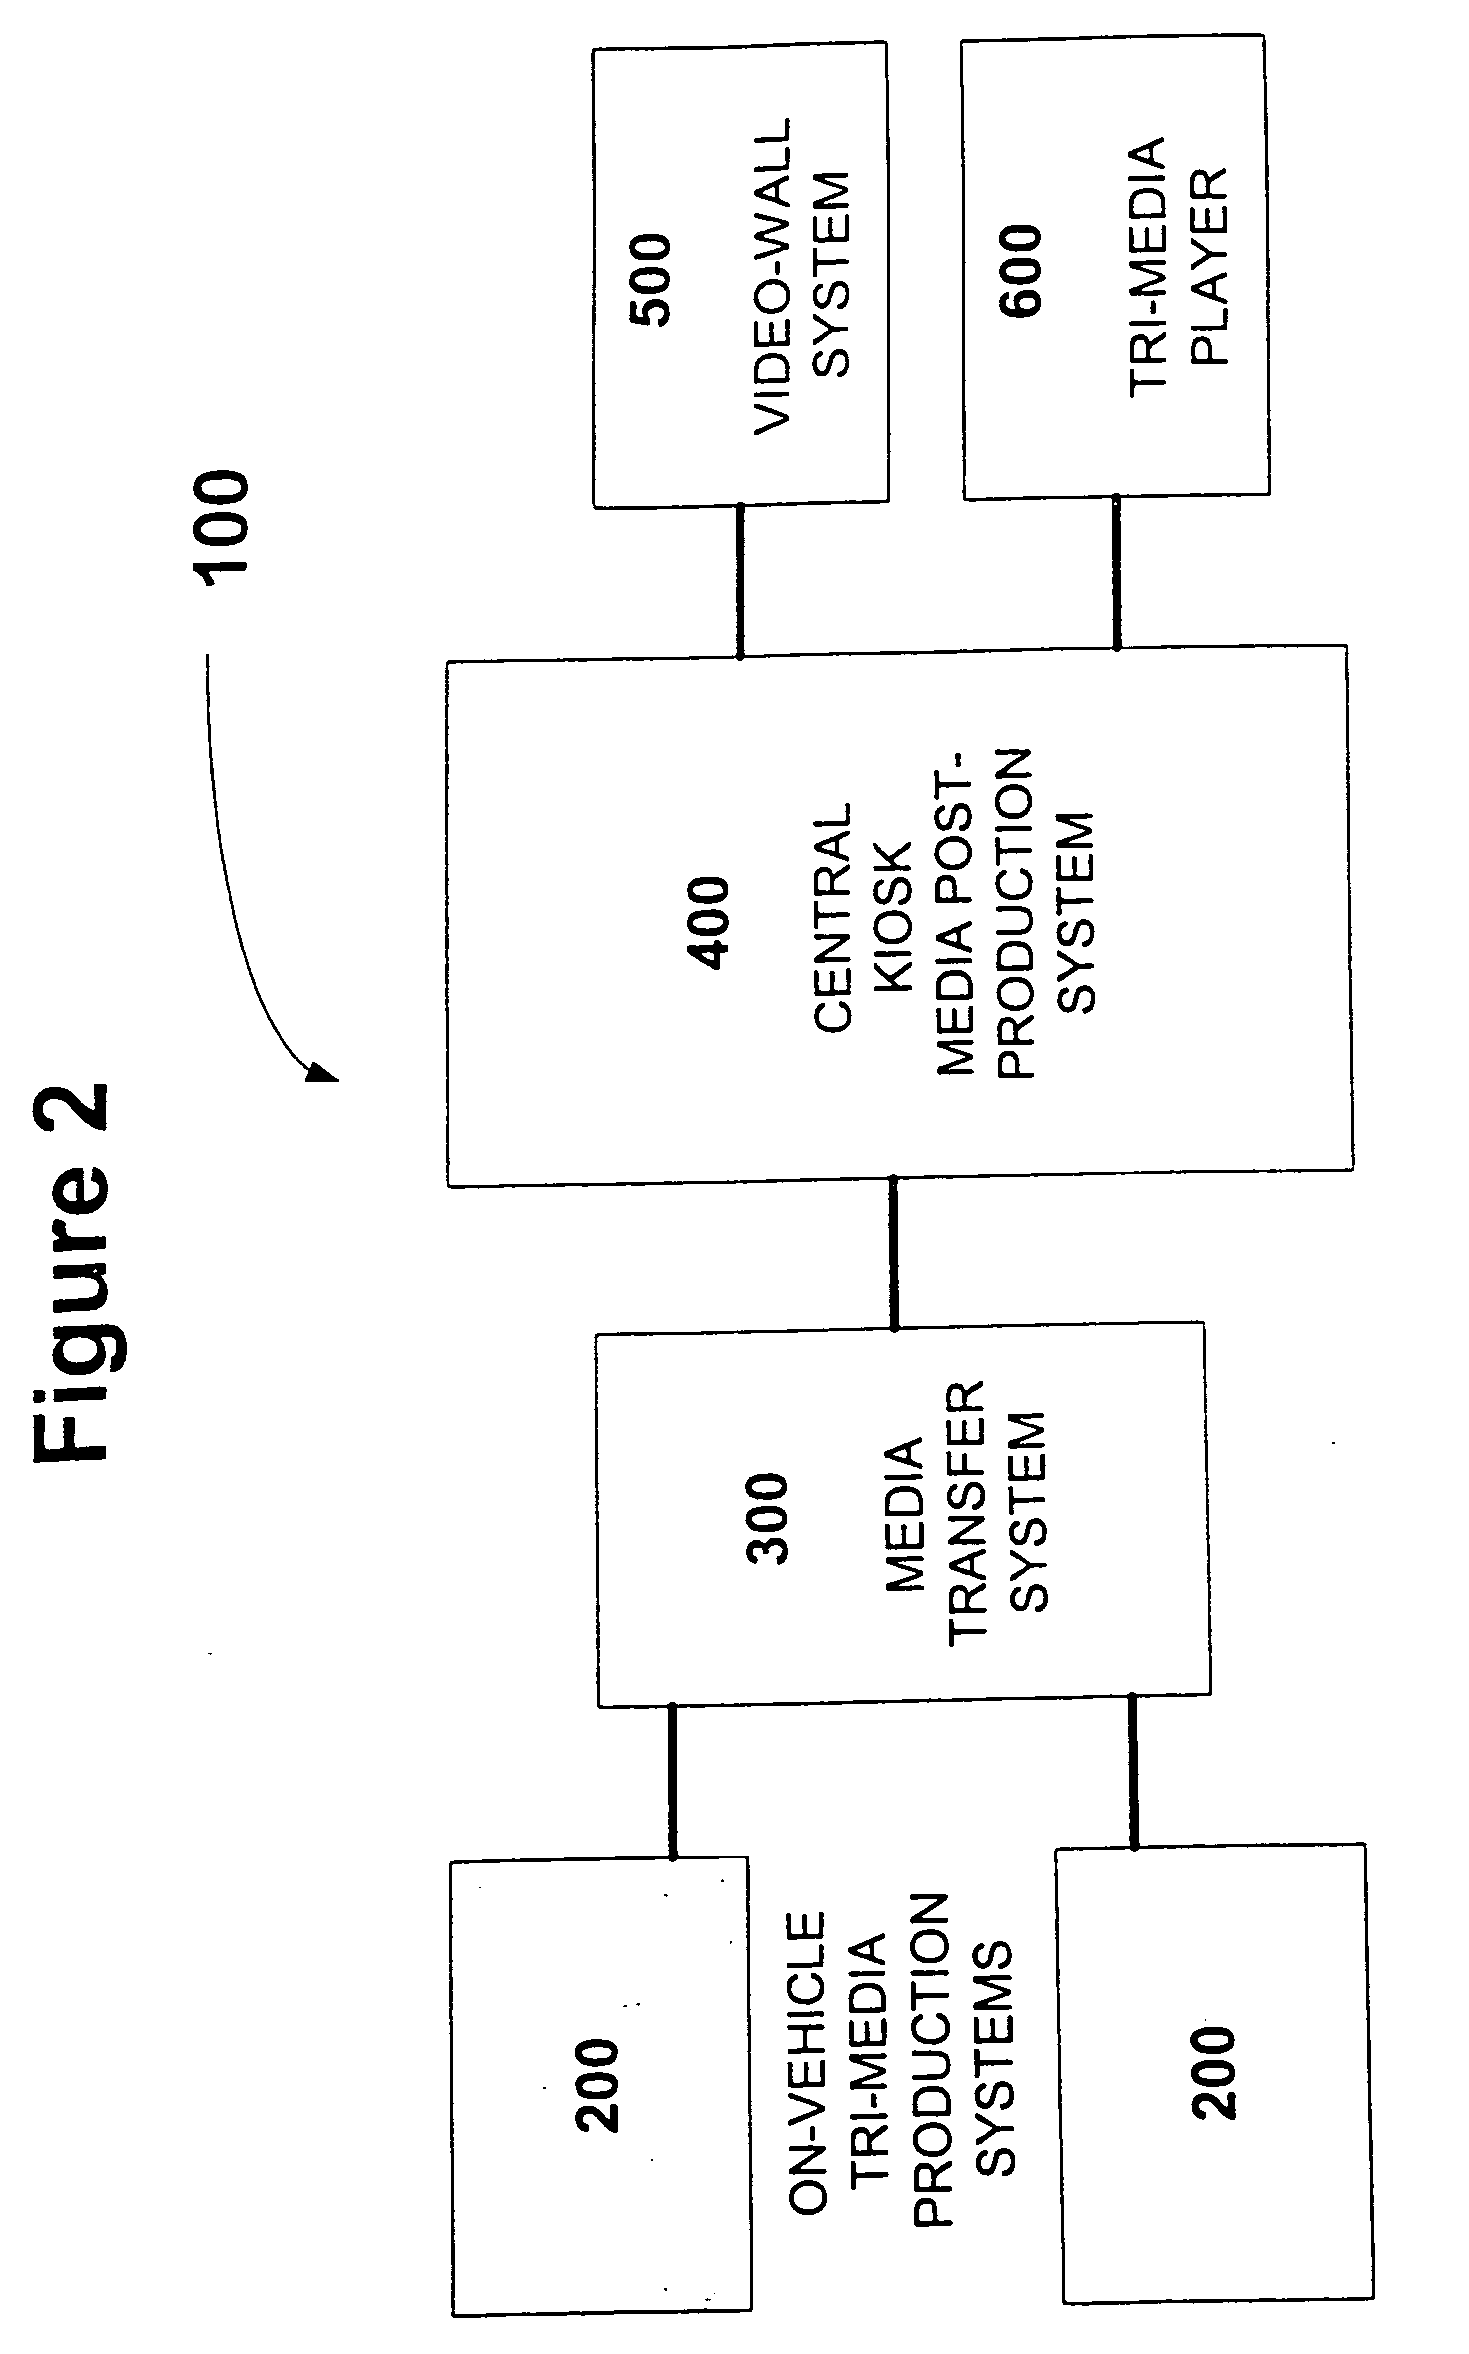 Multimedia racing experience system and corresponding experience based displays